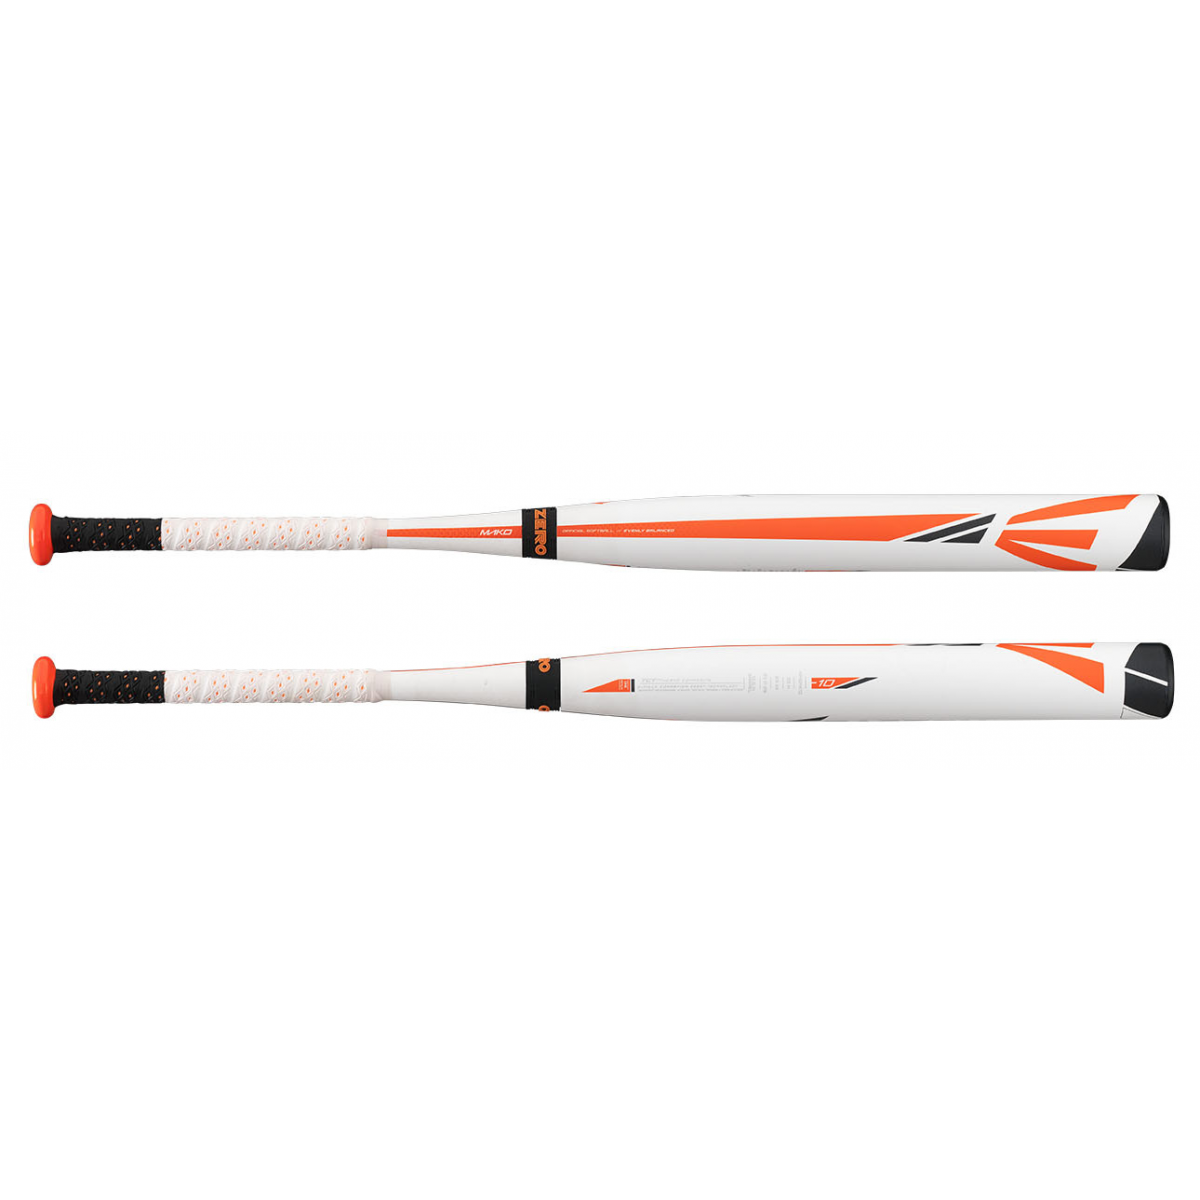 Easton Mako Fast Pitch Softball Bat. CXN zero 2-piece composite speed design with extra long barrel. TCT Thermo Composite Technology offers a massive sweet spot and unmatched bat speed. All new CXN ZERO 2-piece Conation technology engineered for zero vibration and ultimate performance.